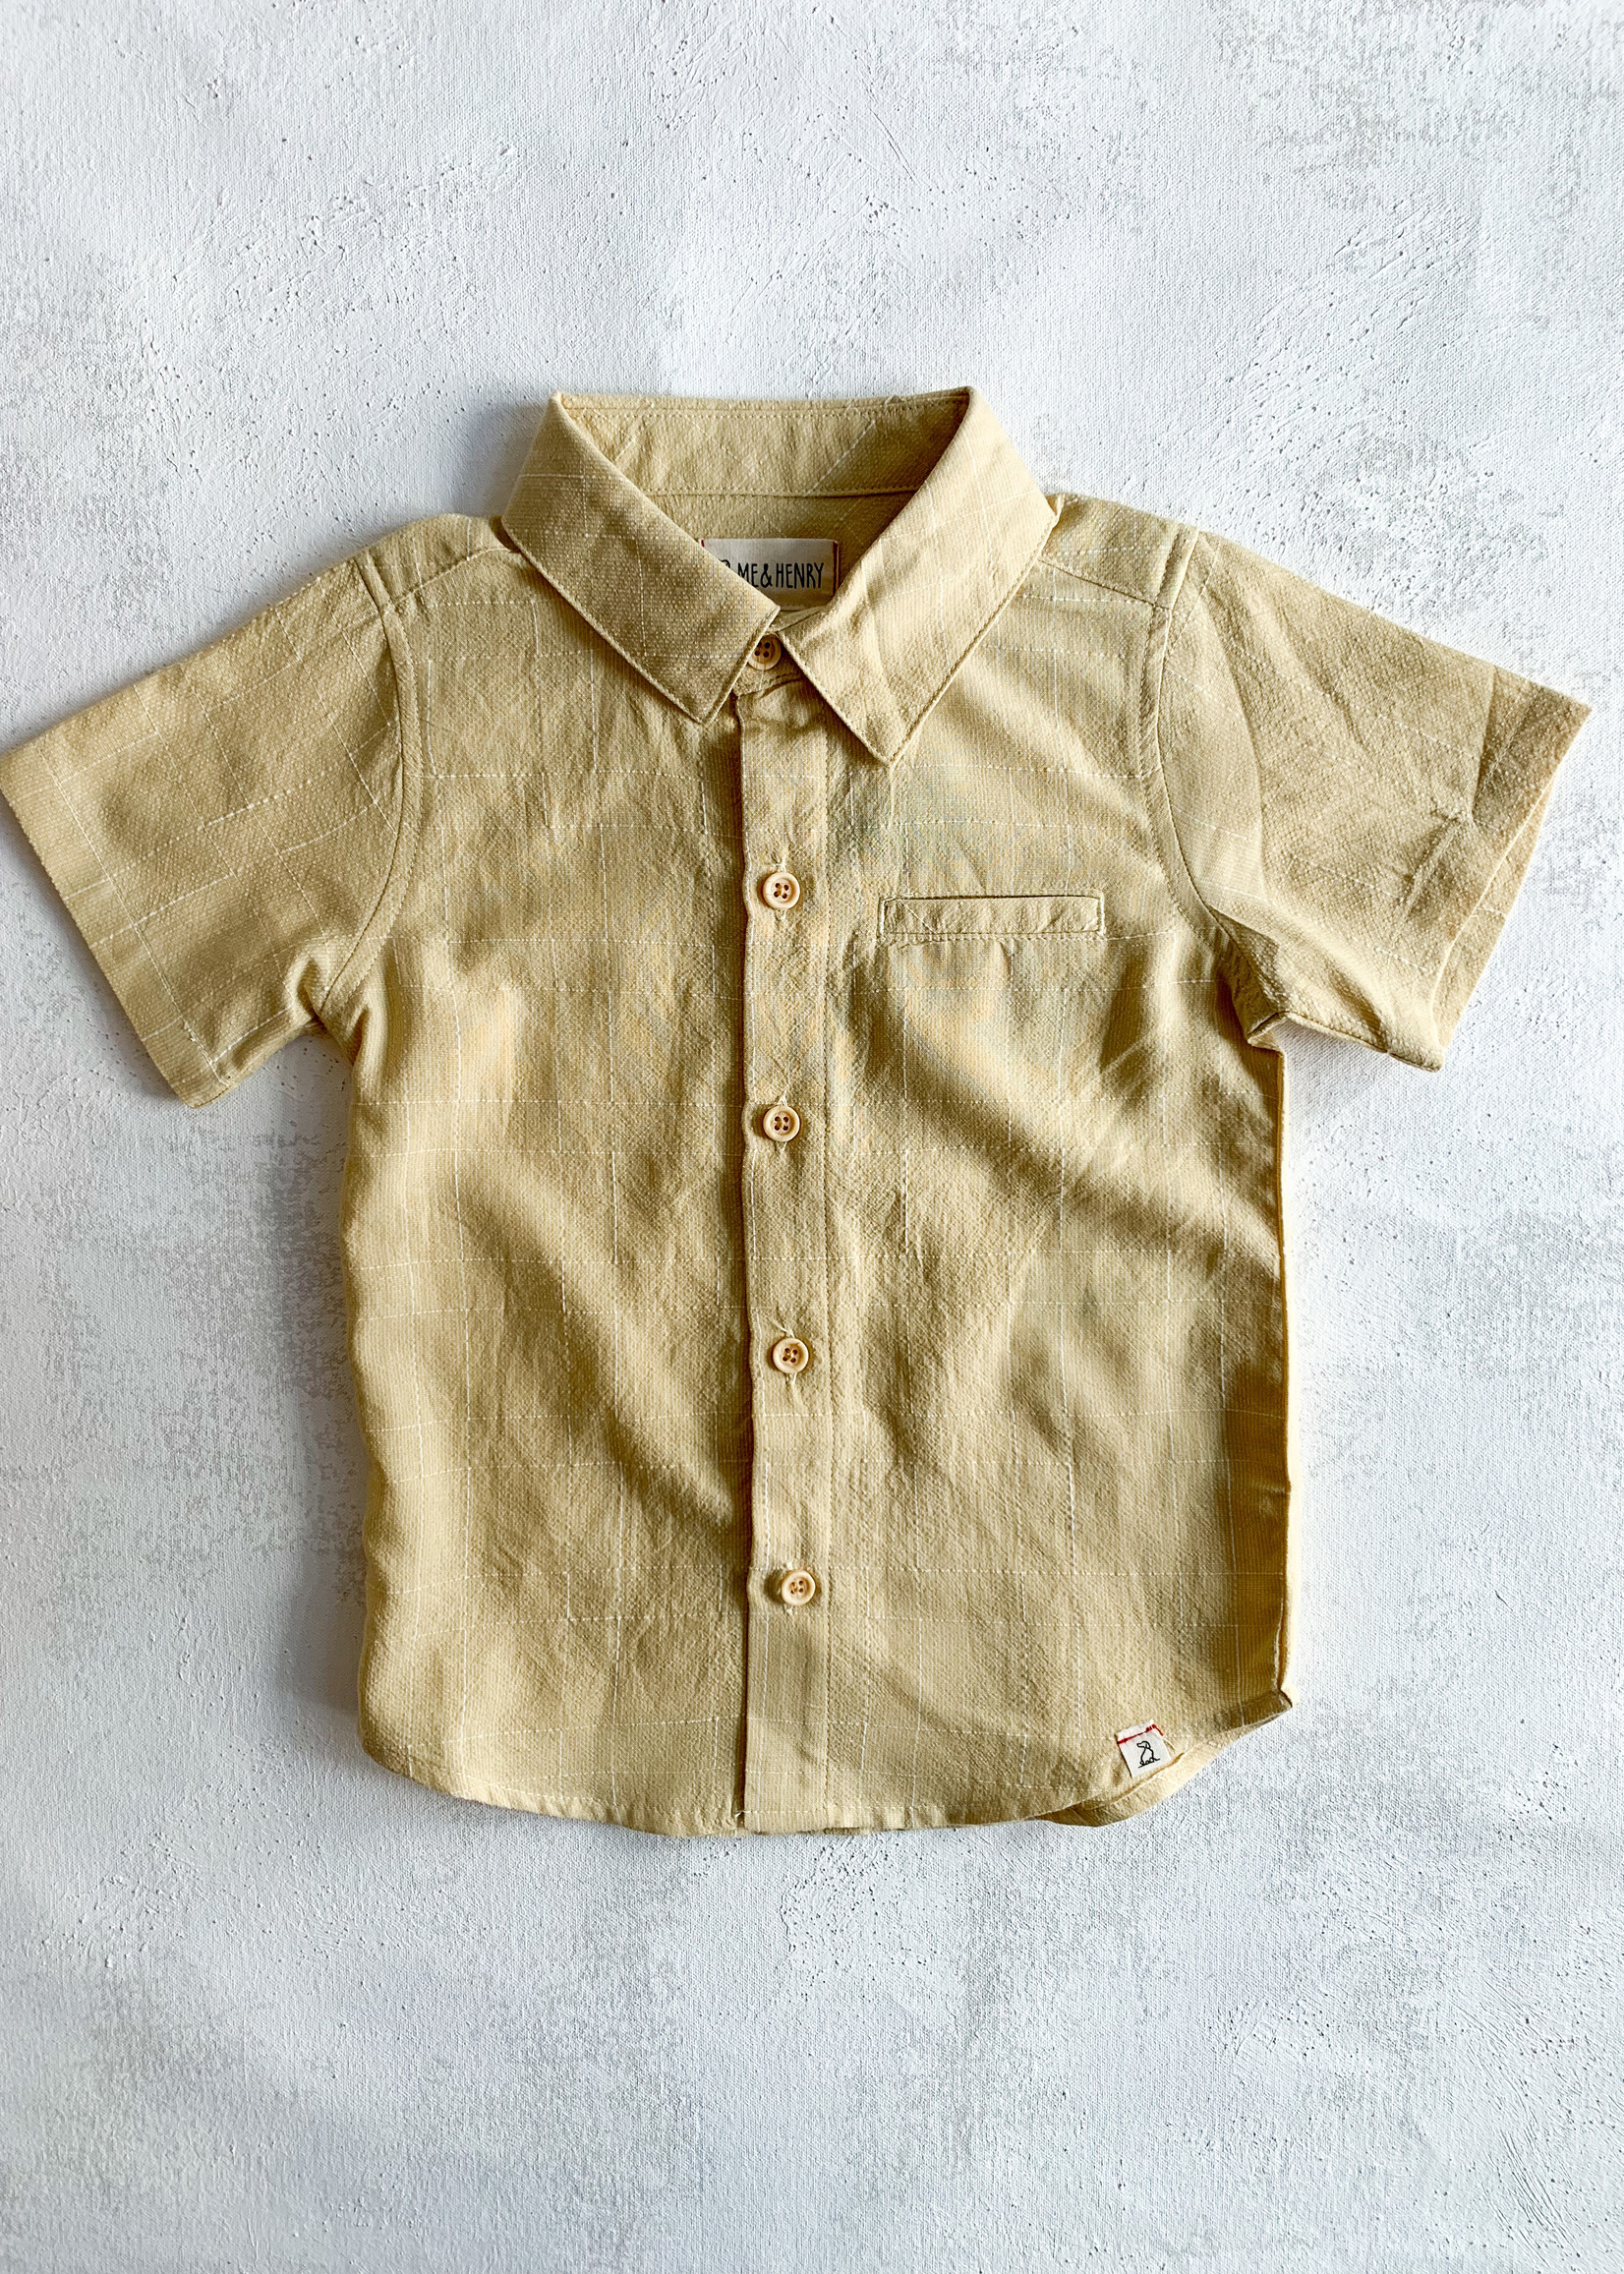 Elitaire Petite Newport Onesie and Shirt in Yellow Grid